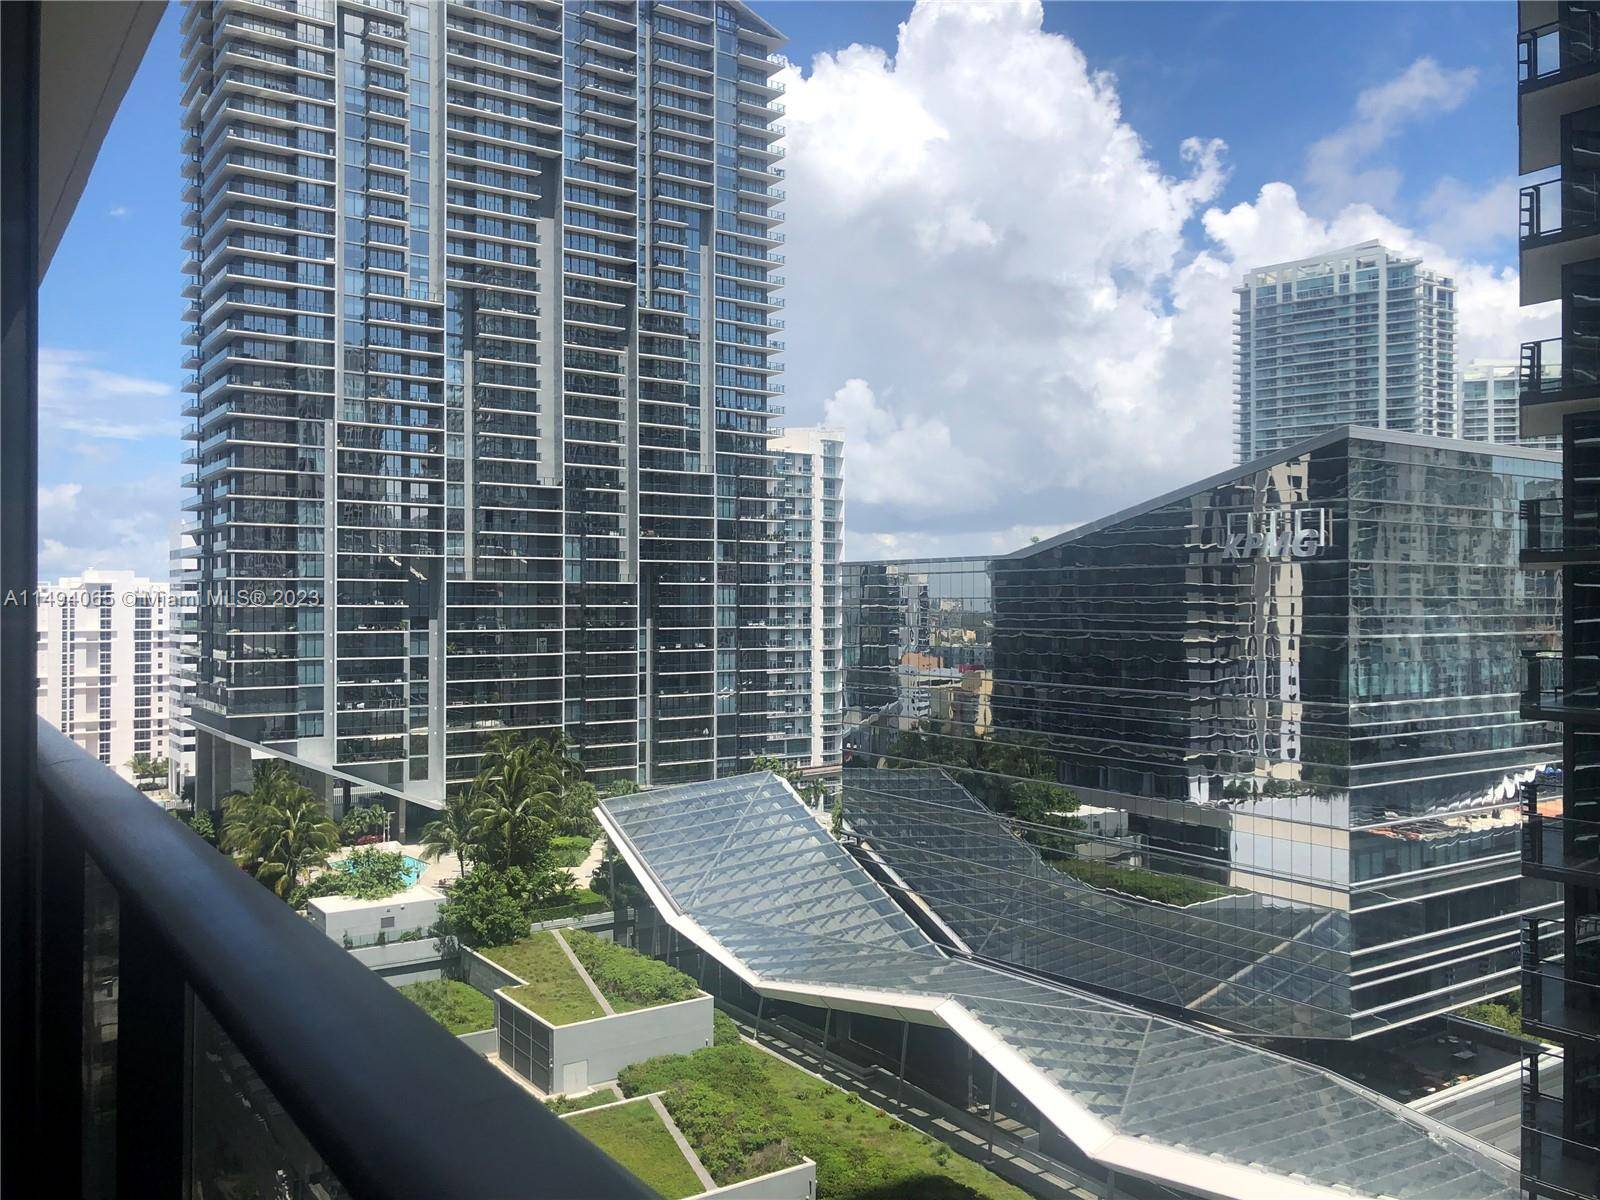 Welcome to this modern oasis in the heart of Brickell !